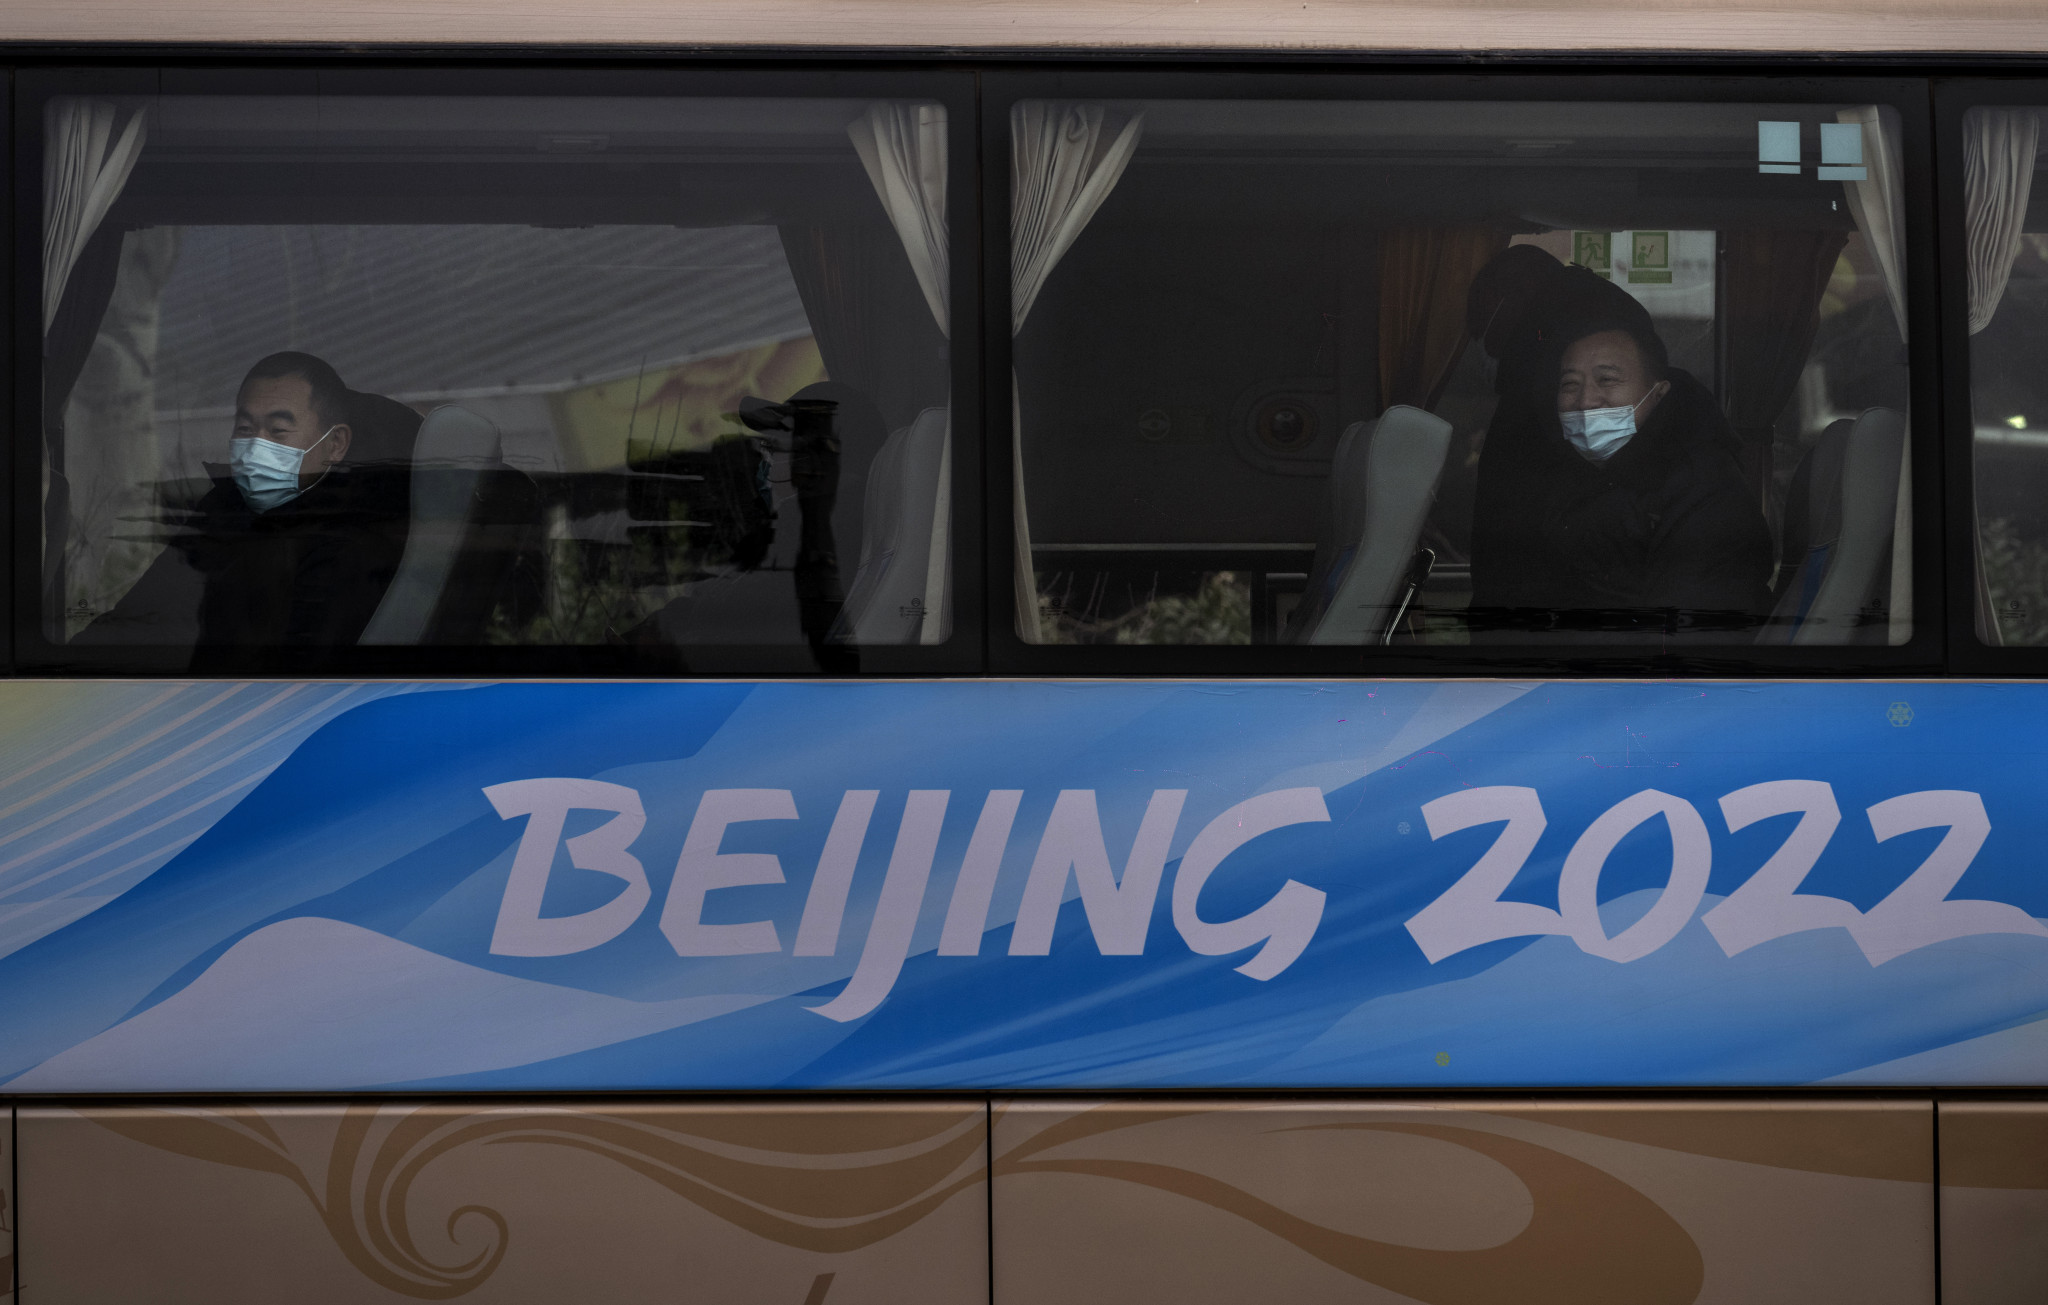 Mass testing launched in Beijing as COVID-19 fears grow less than two weeks before Olympics open